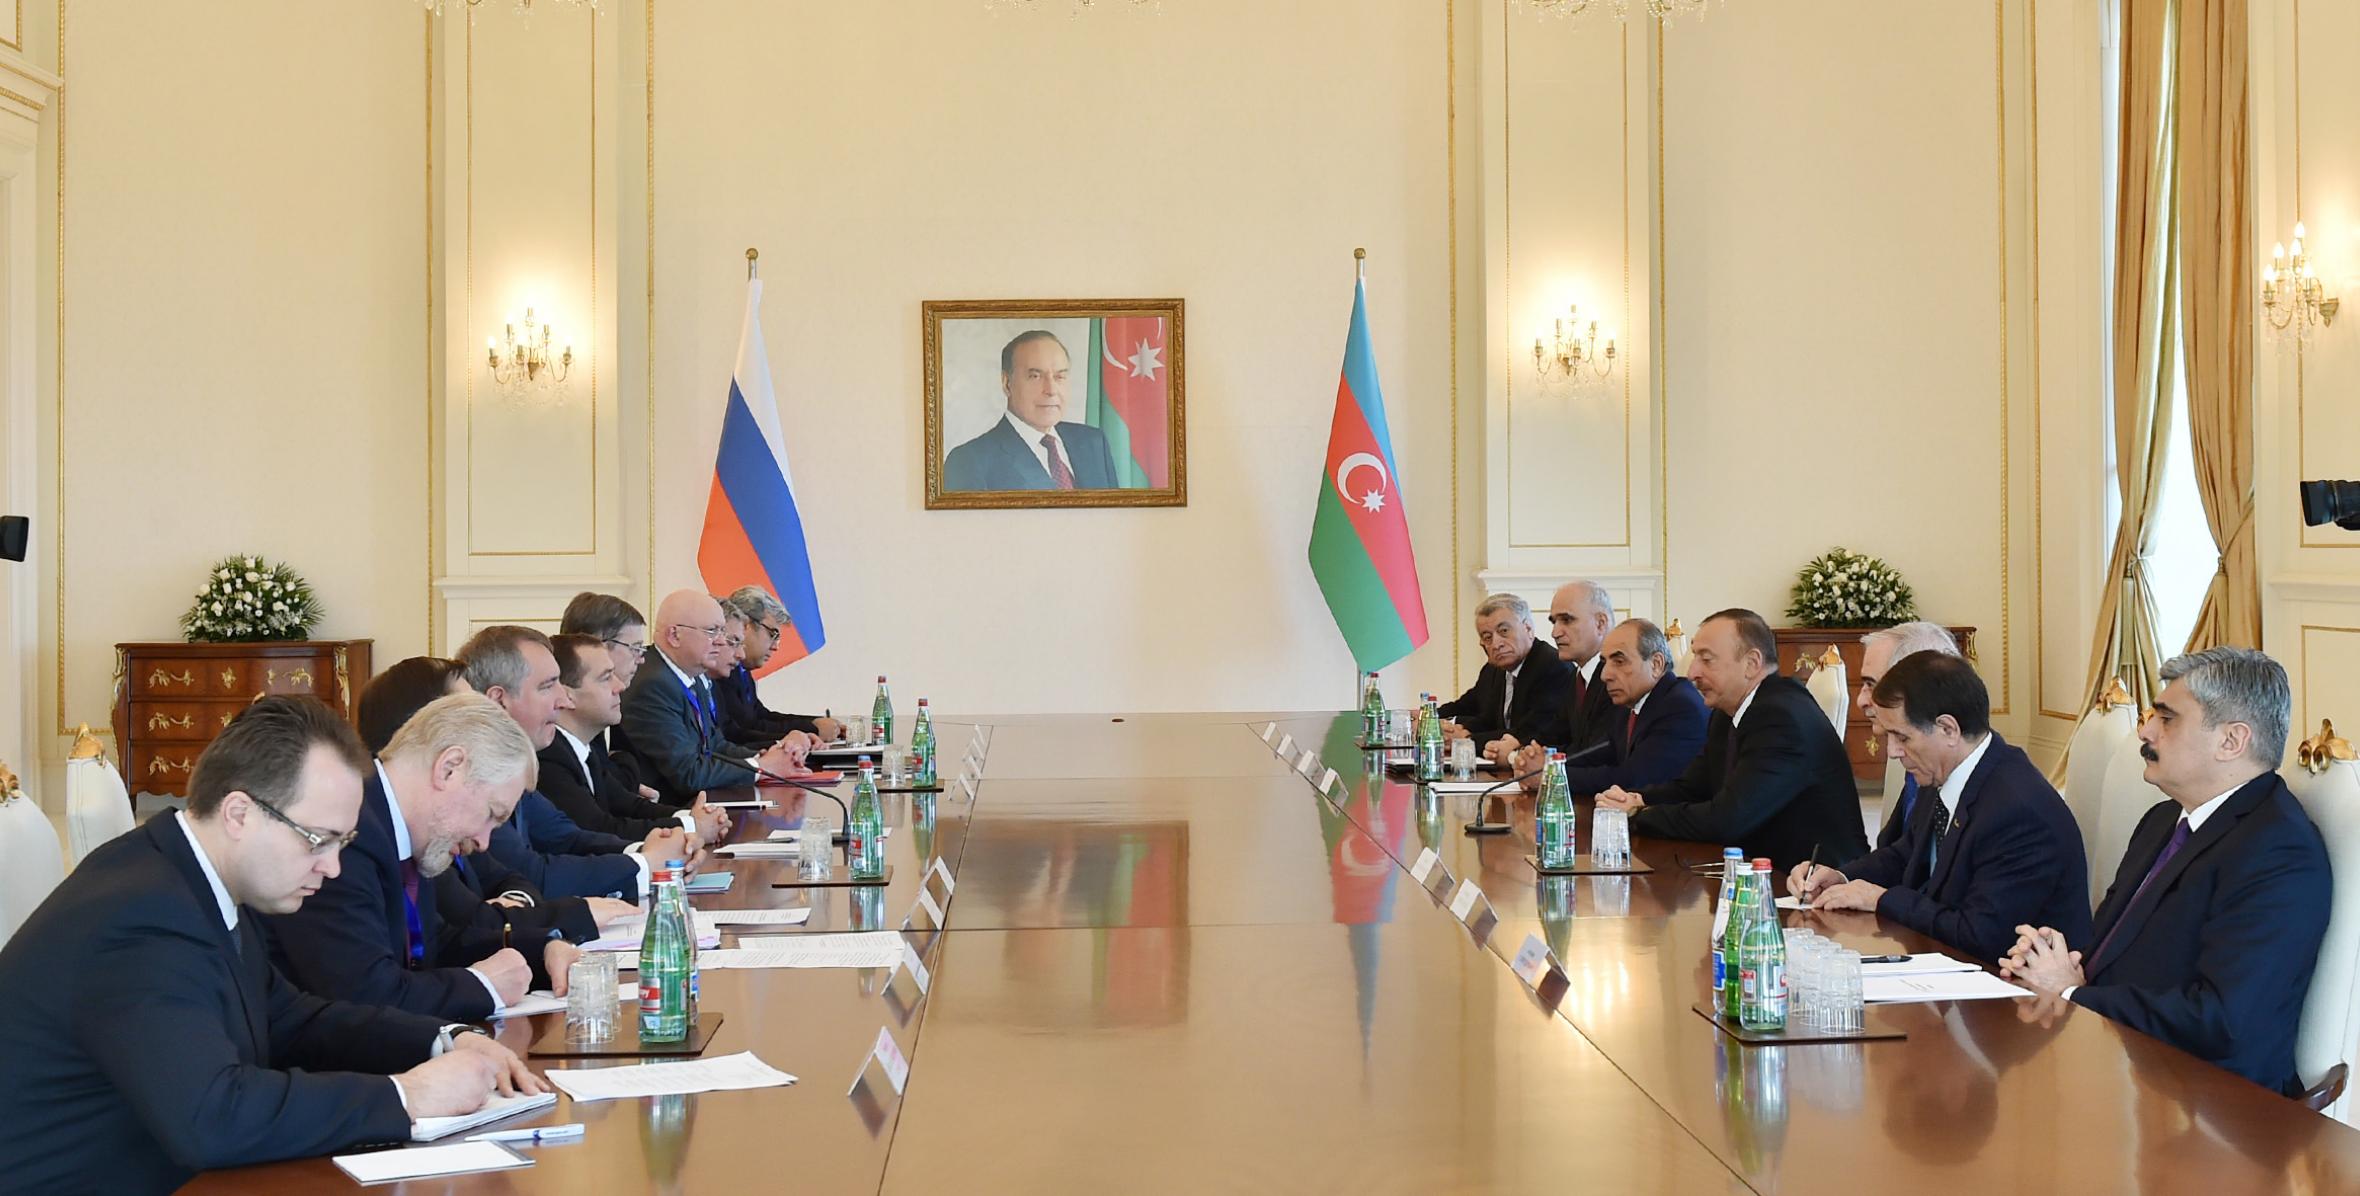 Ilham Aliyev and Chairman of the Russian government met in an expanded format